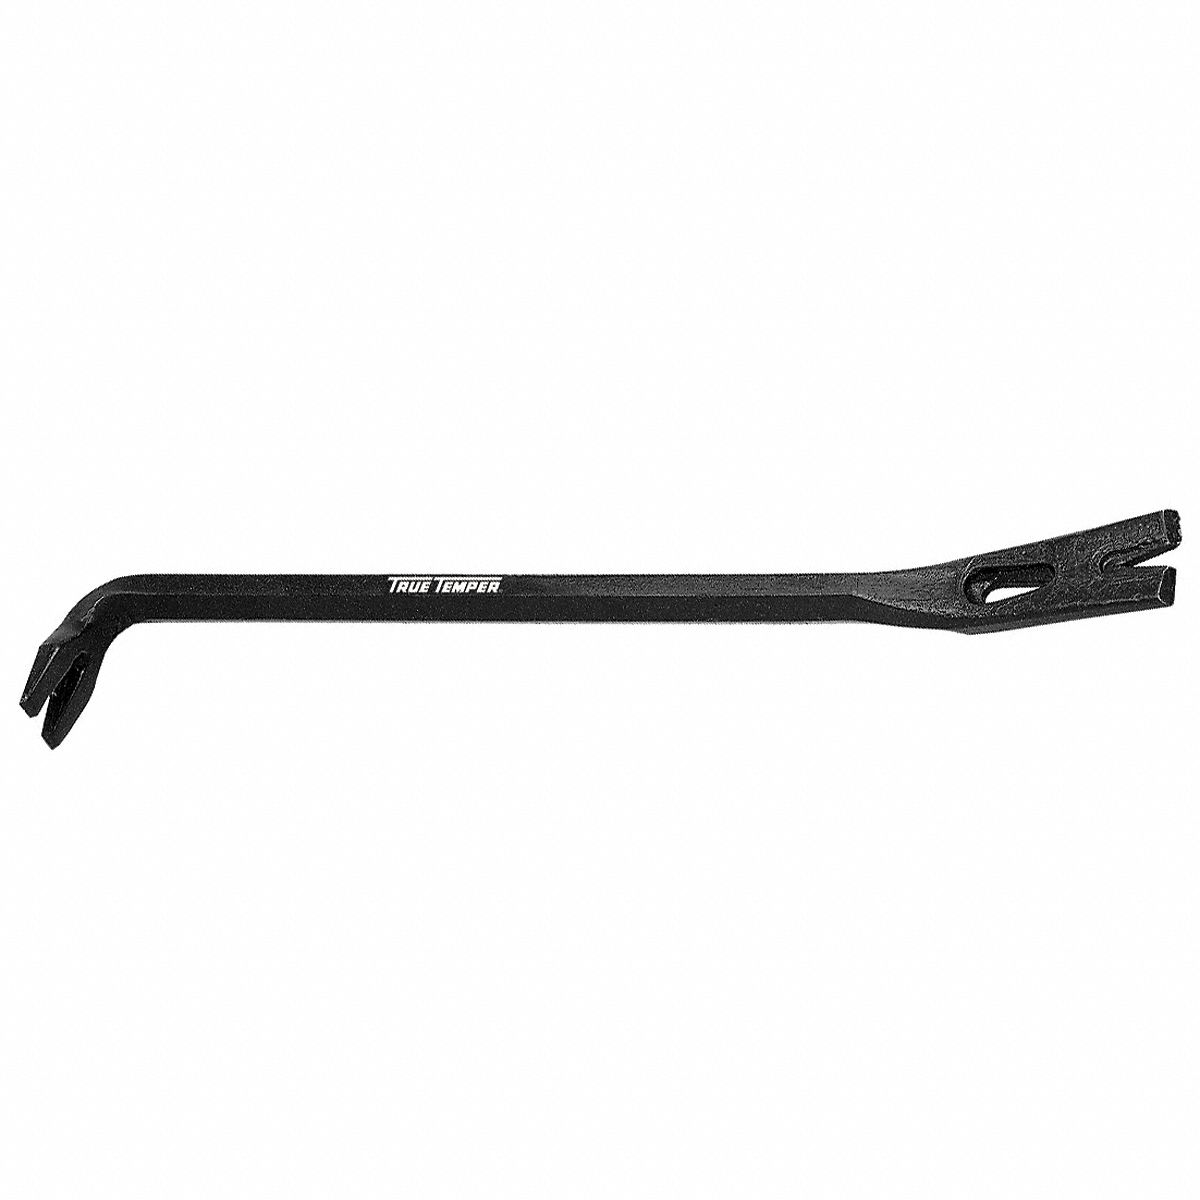 True Temper Ripping Bars,Offset Ripping Bar,17 In. L  1166100 - image 1 of 1